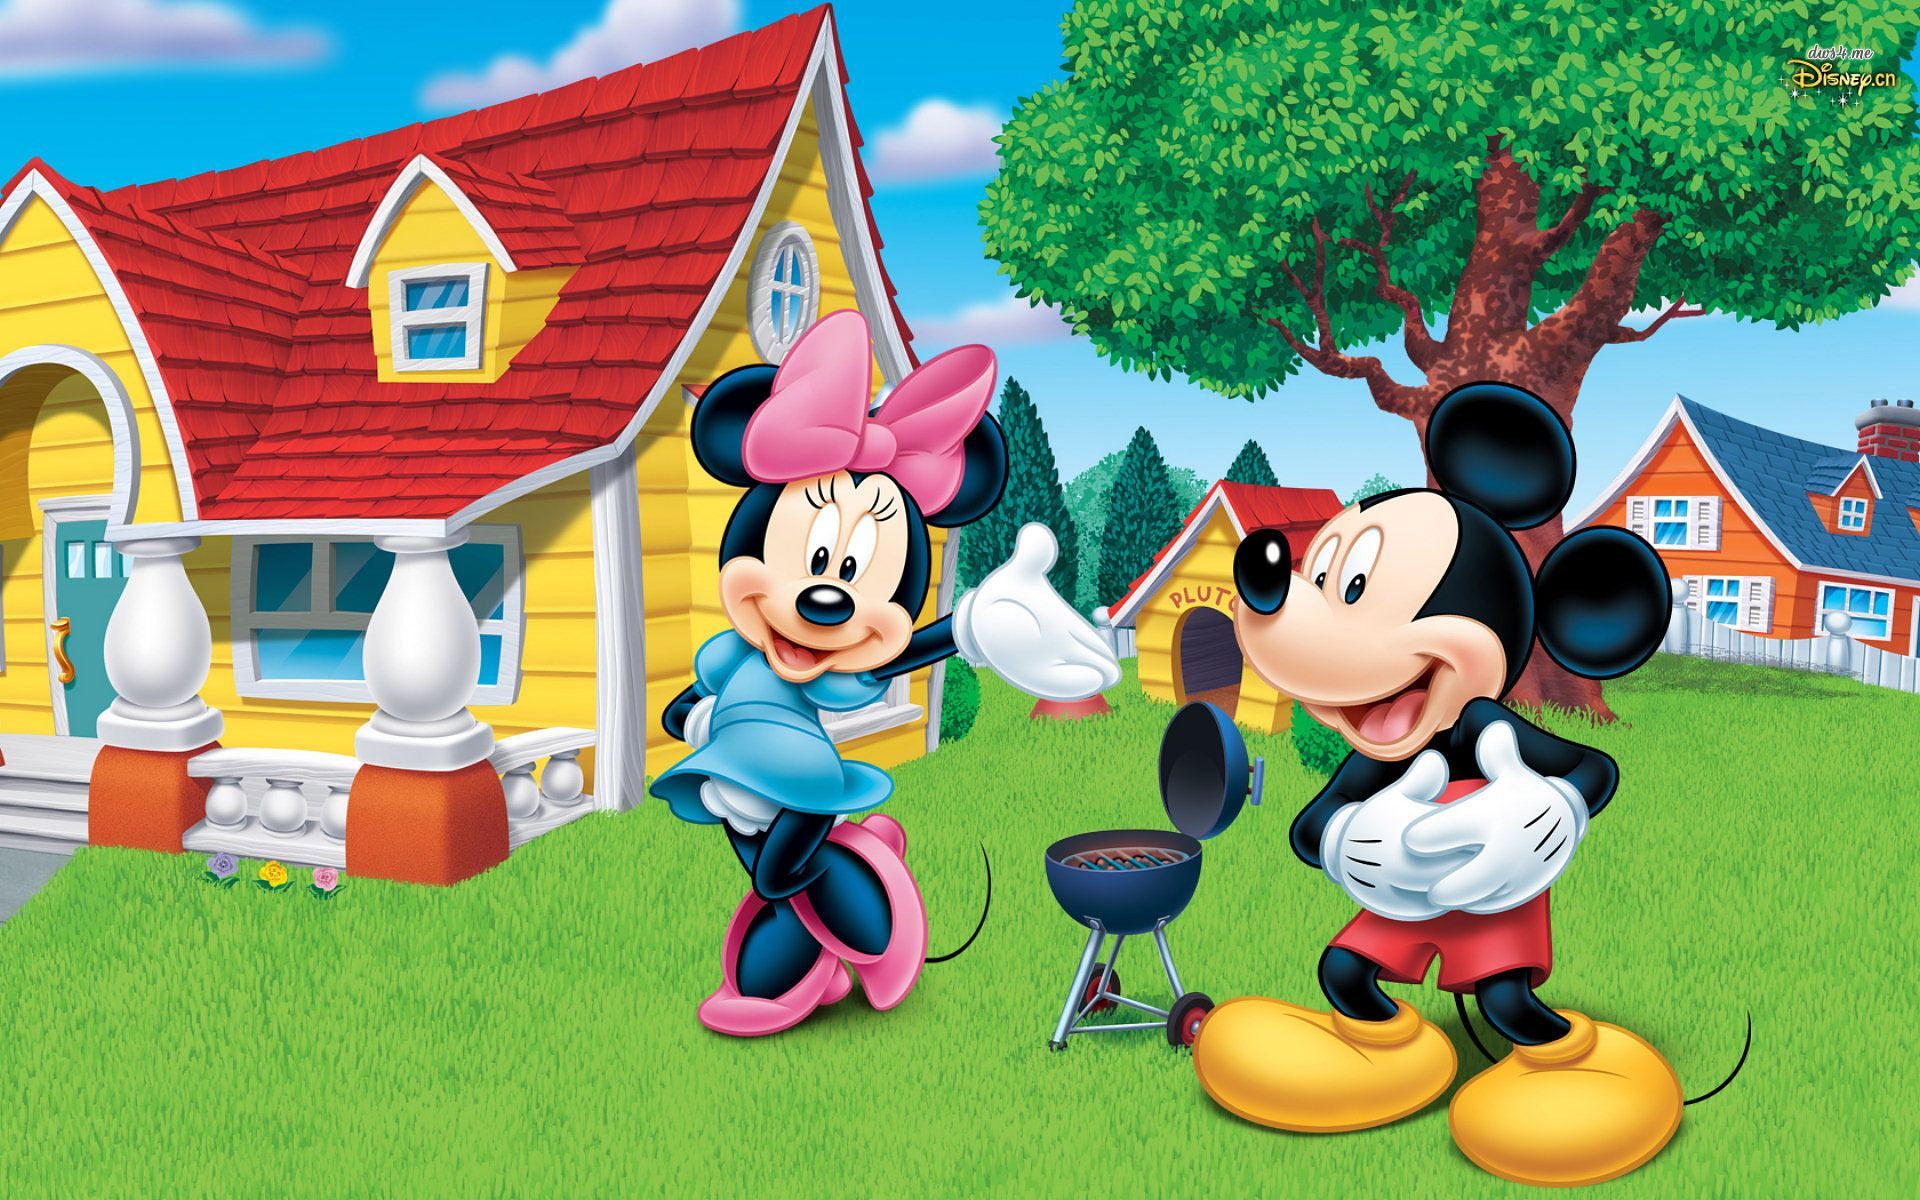 Minnie and Mickey Mouse wallpaper - Cartoon wallpapers - #20383